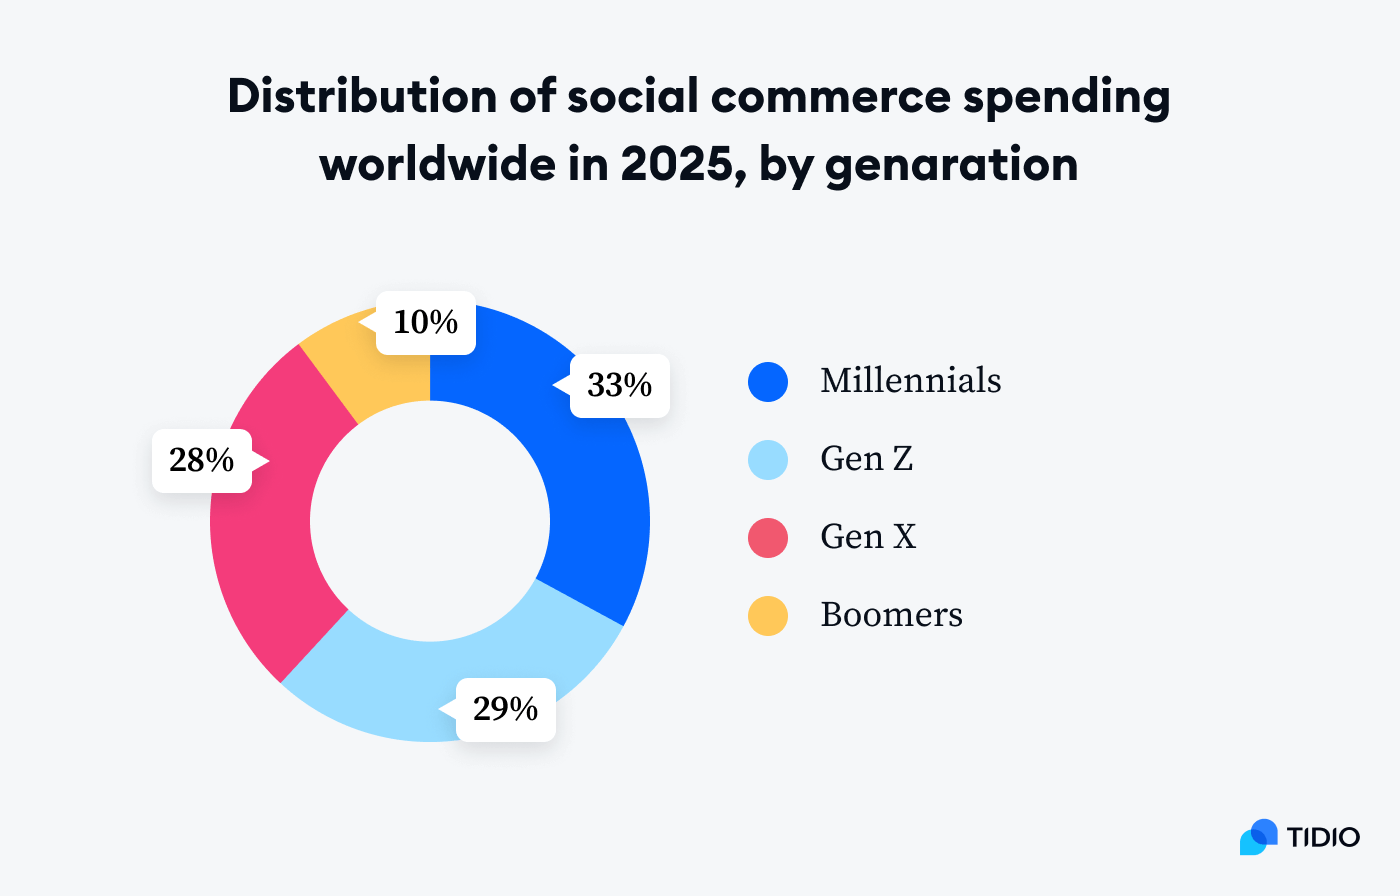 Millennials will remain the most active social commerce customers, making 33% of all purchases by 2025